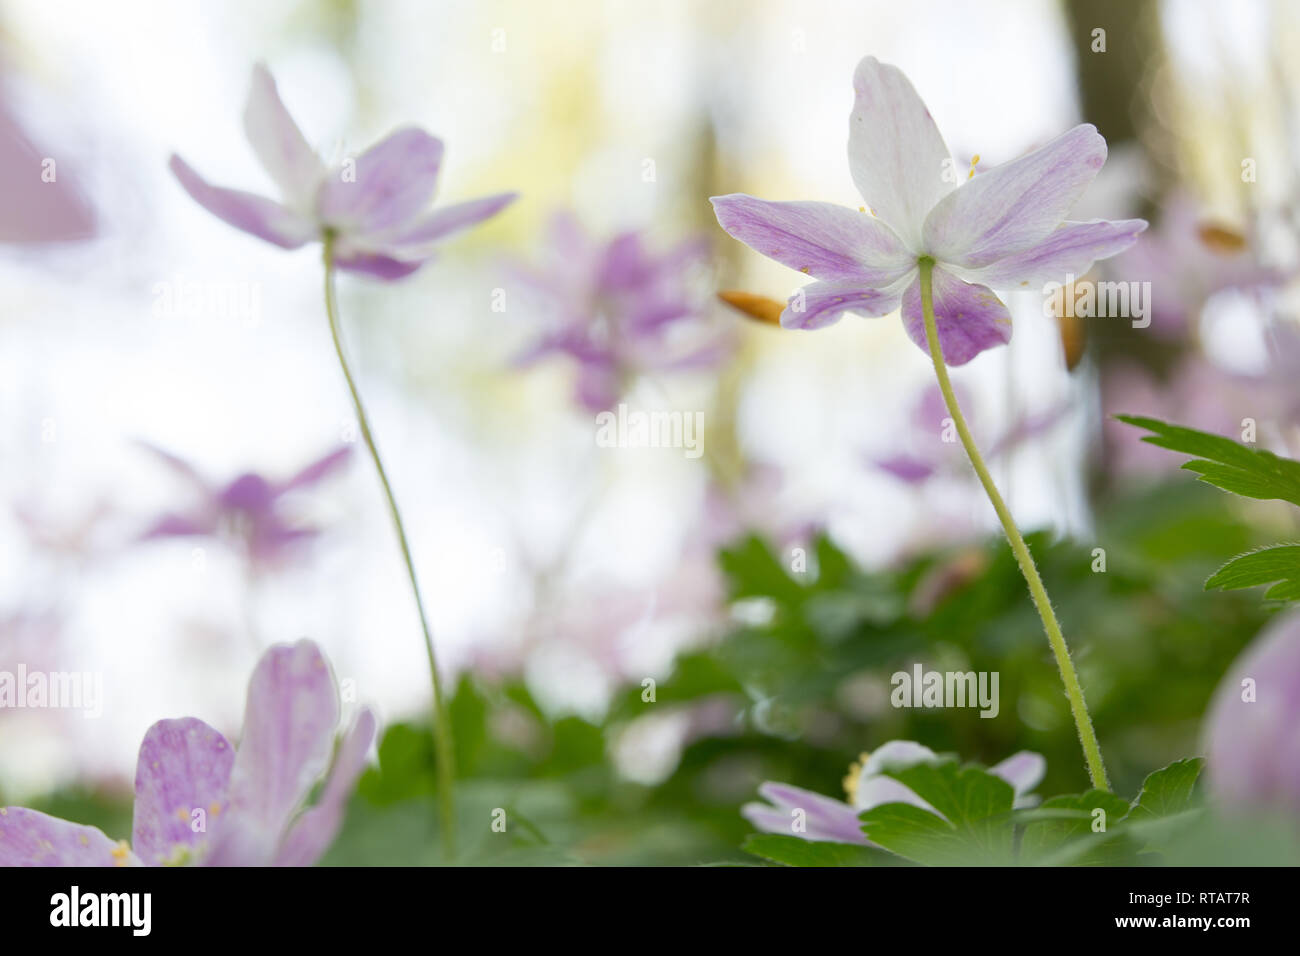 early spring wildflowers reaching for the sky. Shallow depth image with soft focus. Concept for purity of a new beginning in spring. Stock Photo